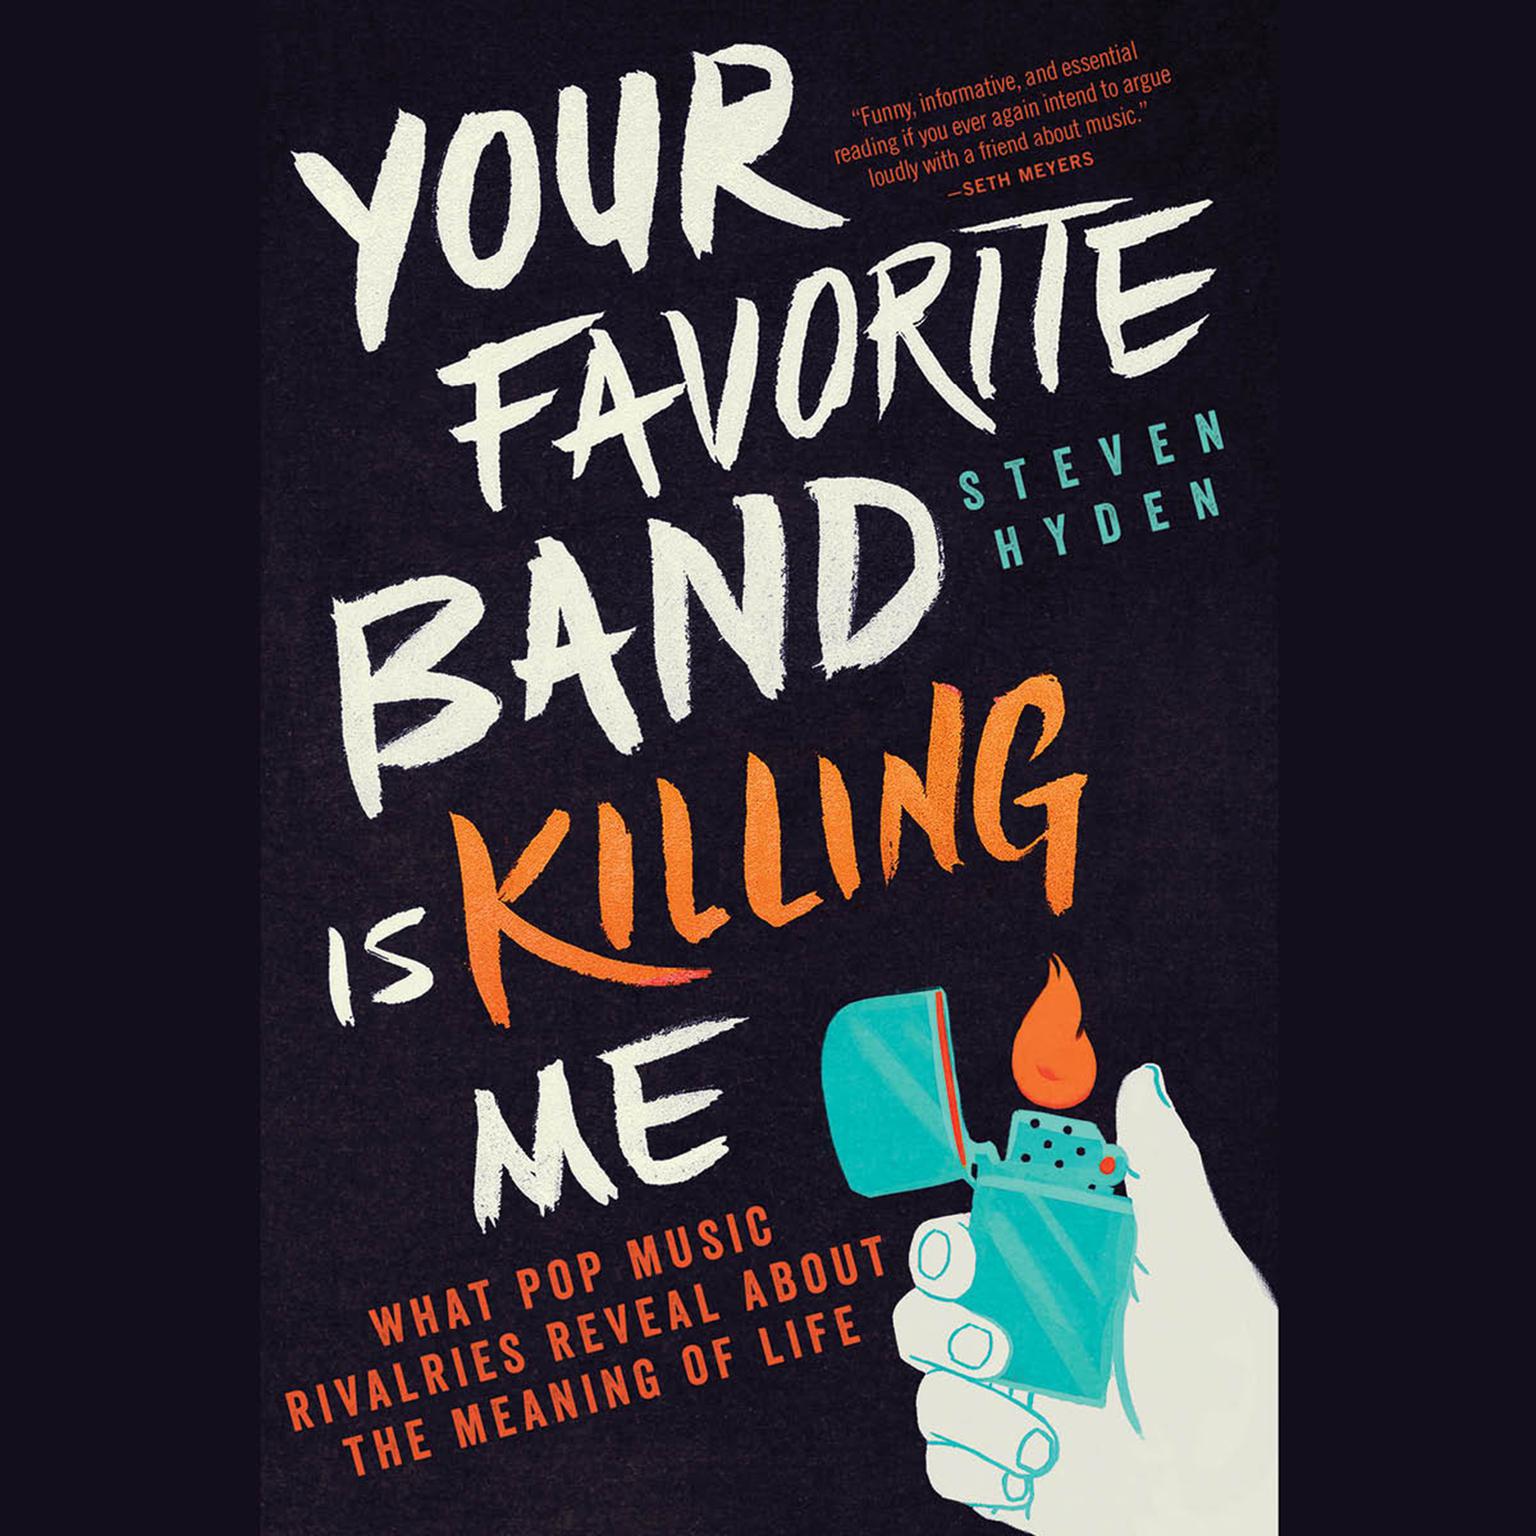 Your Favorite Band Is Killing Me: What Pop Music Rivalries Reveal About the Meaning of Life Audiobook, by Steven Hyden